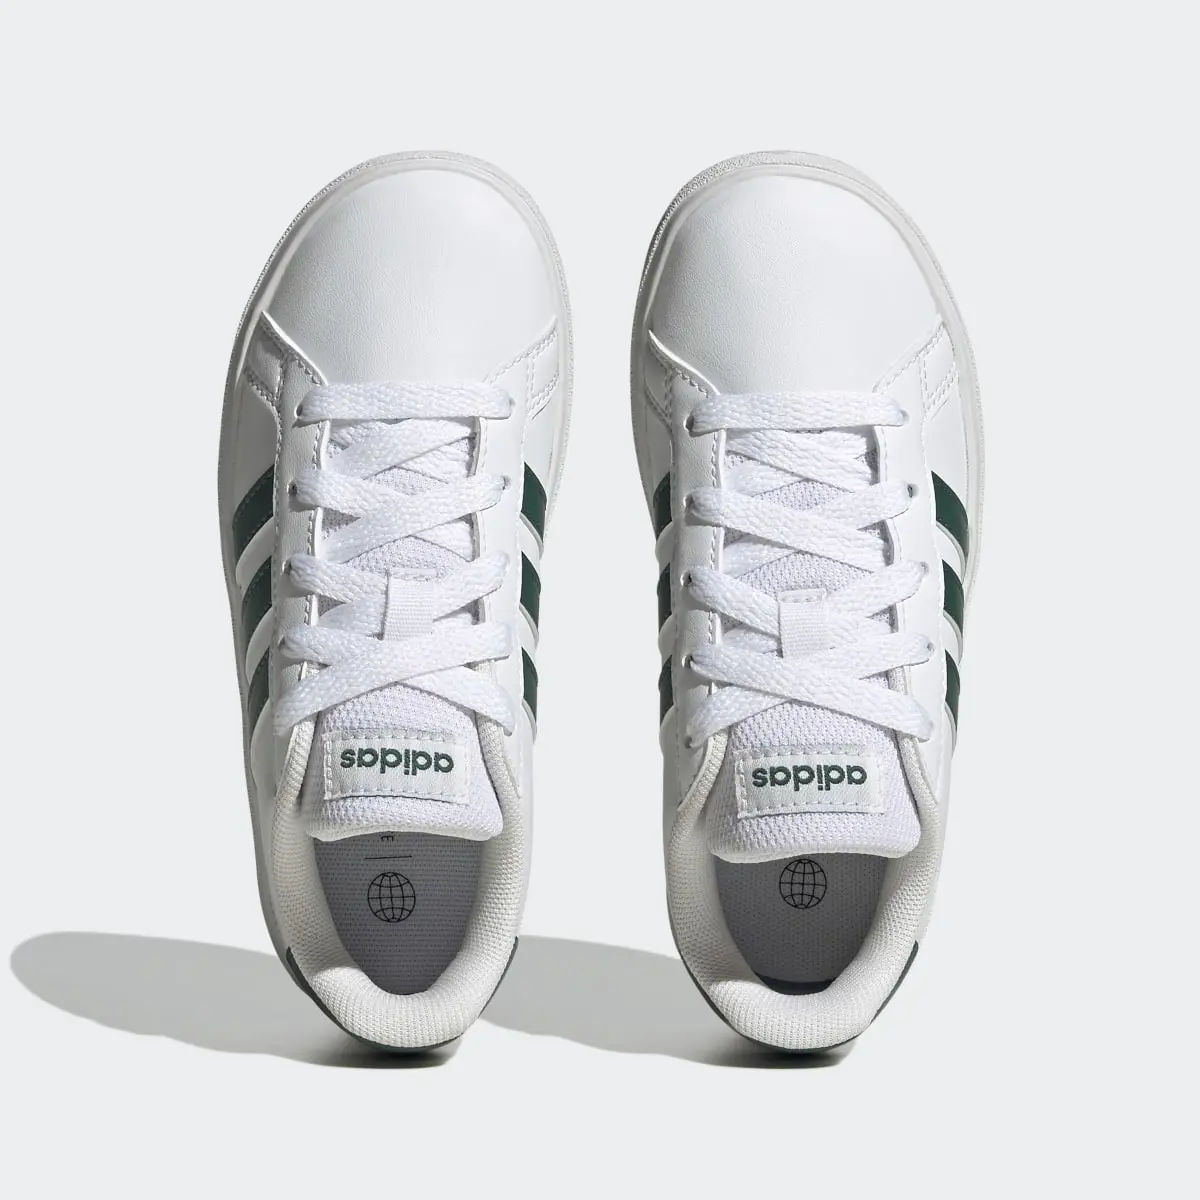 Adidas Grand Court Lifestyle Tennis Lace-Up Schuh. 3